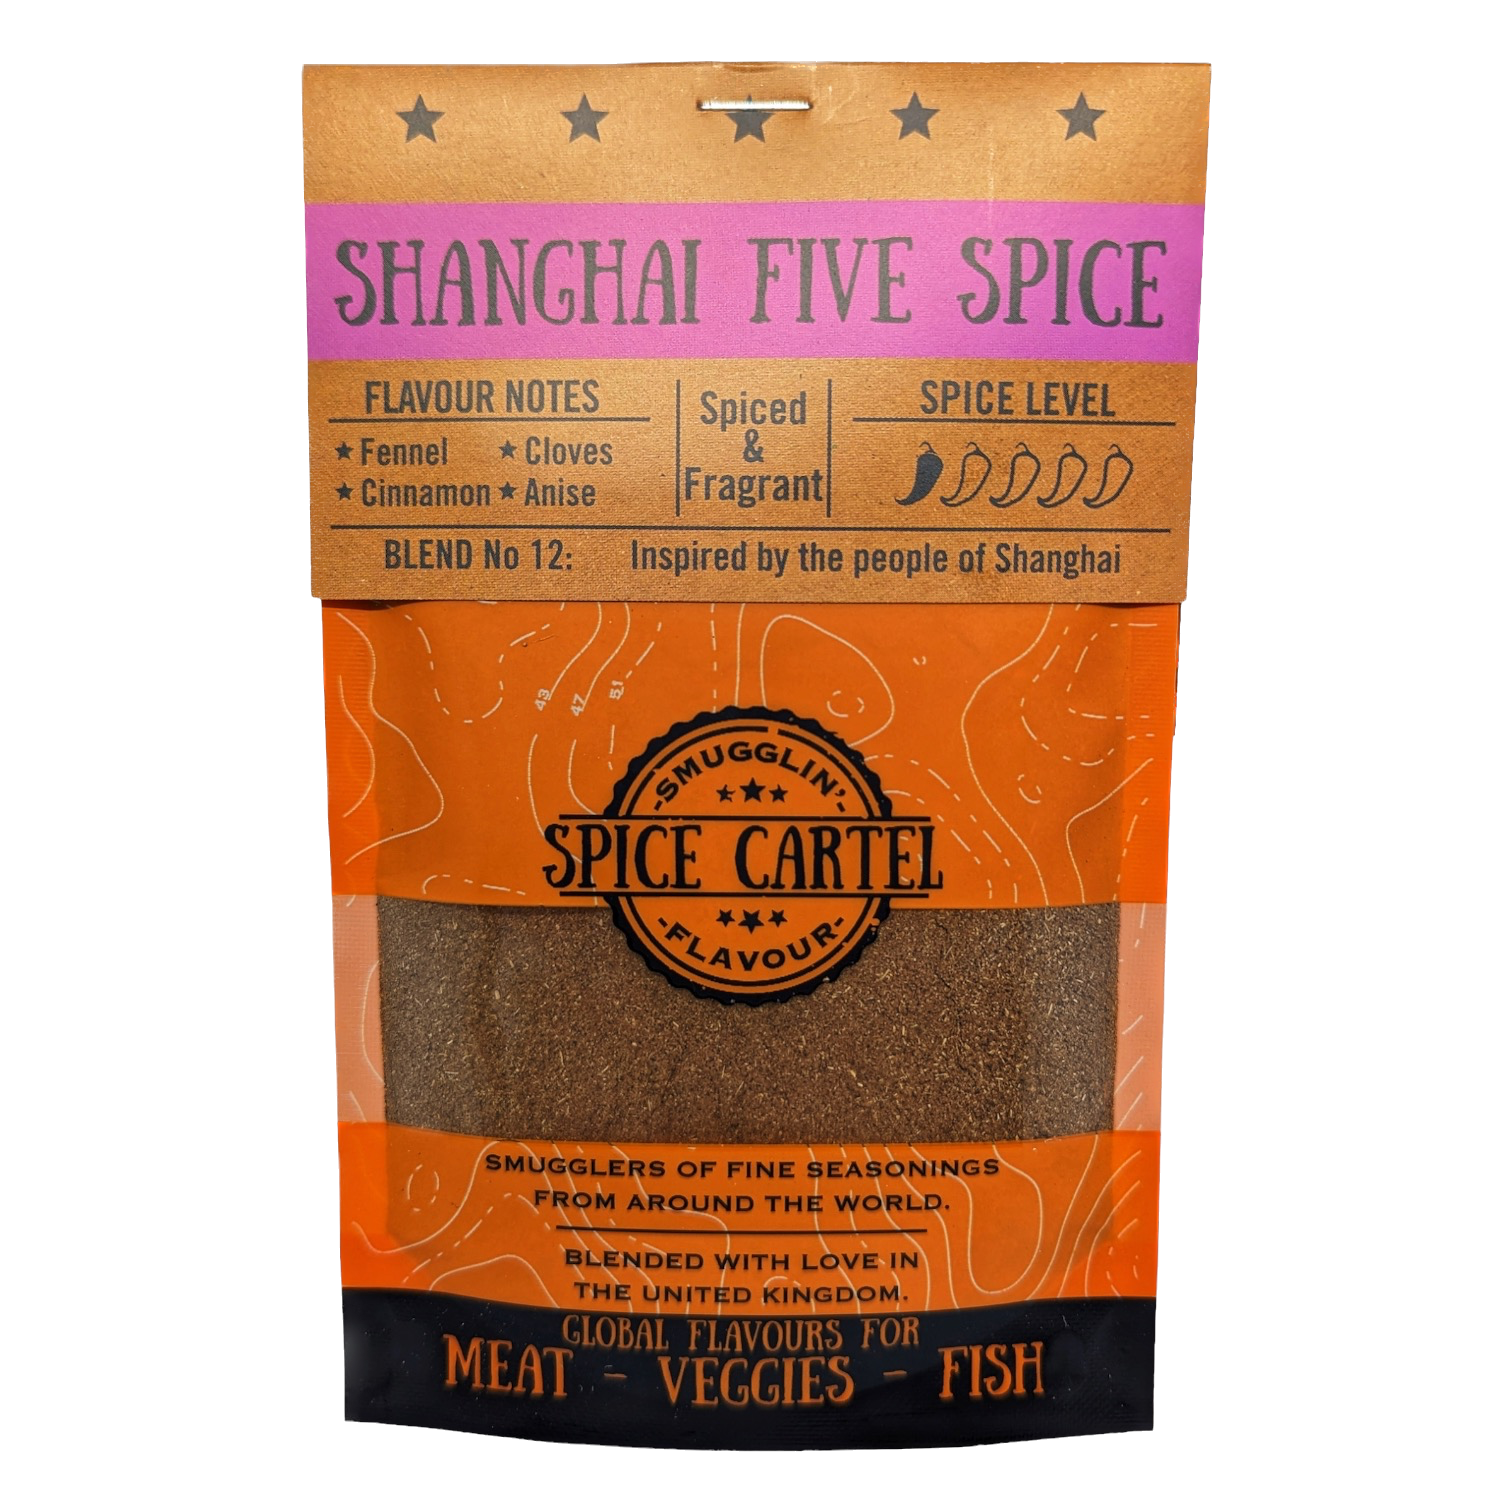 Spice Cartel's Shanghai Five Spice 35g Resealable Pouch-0